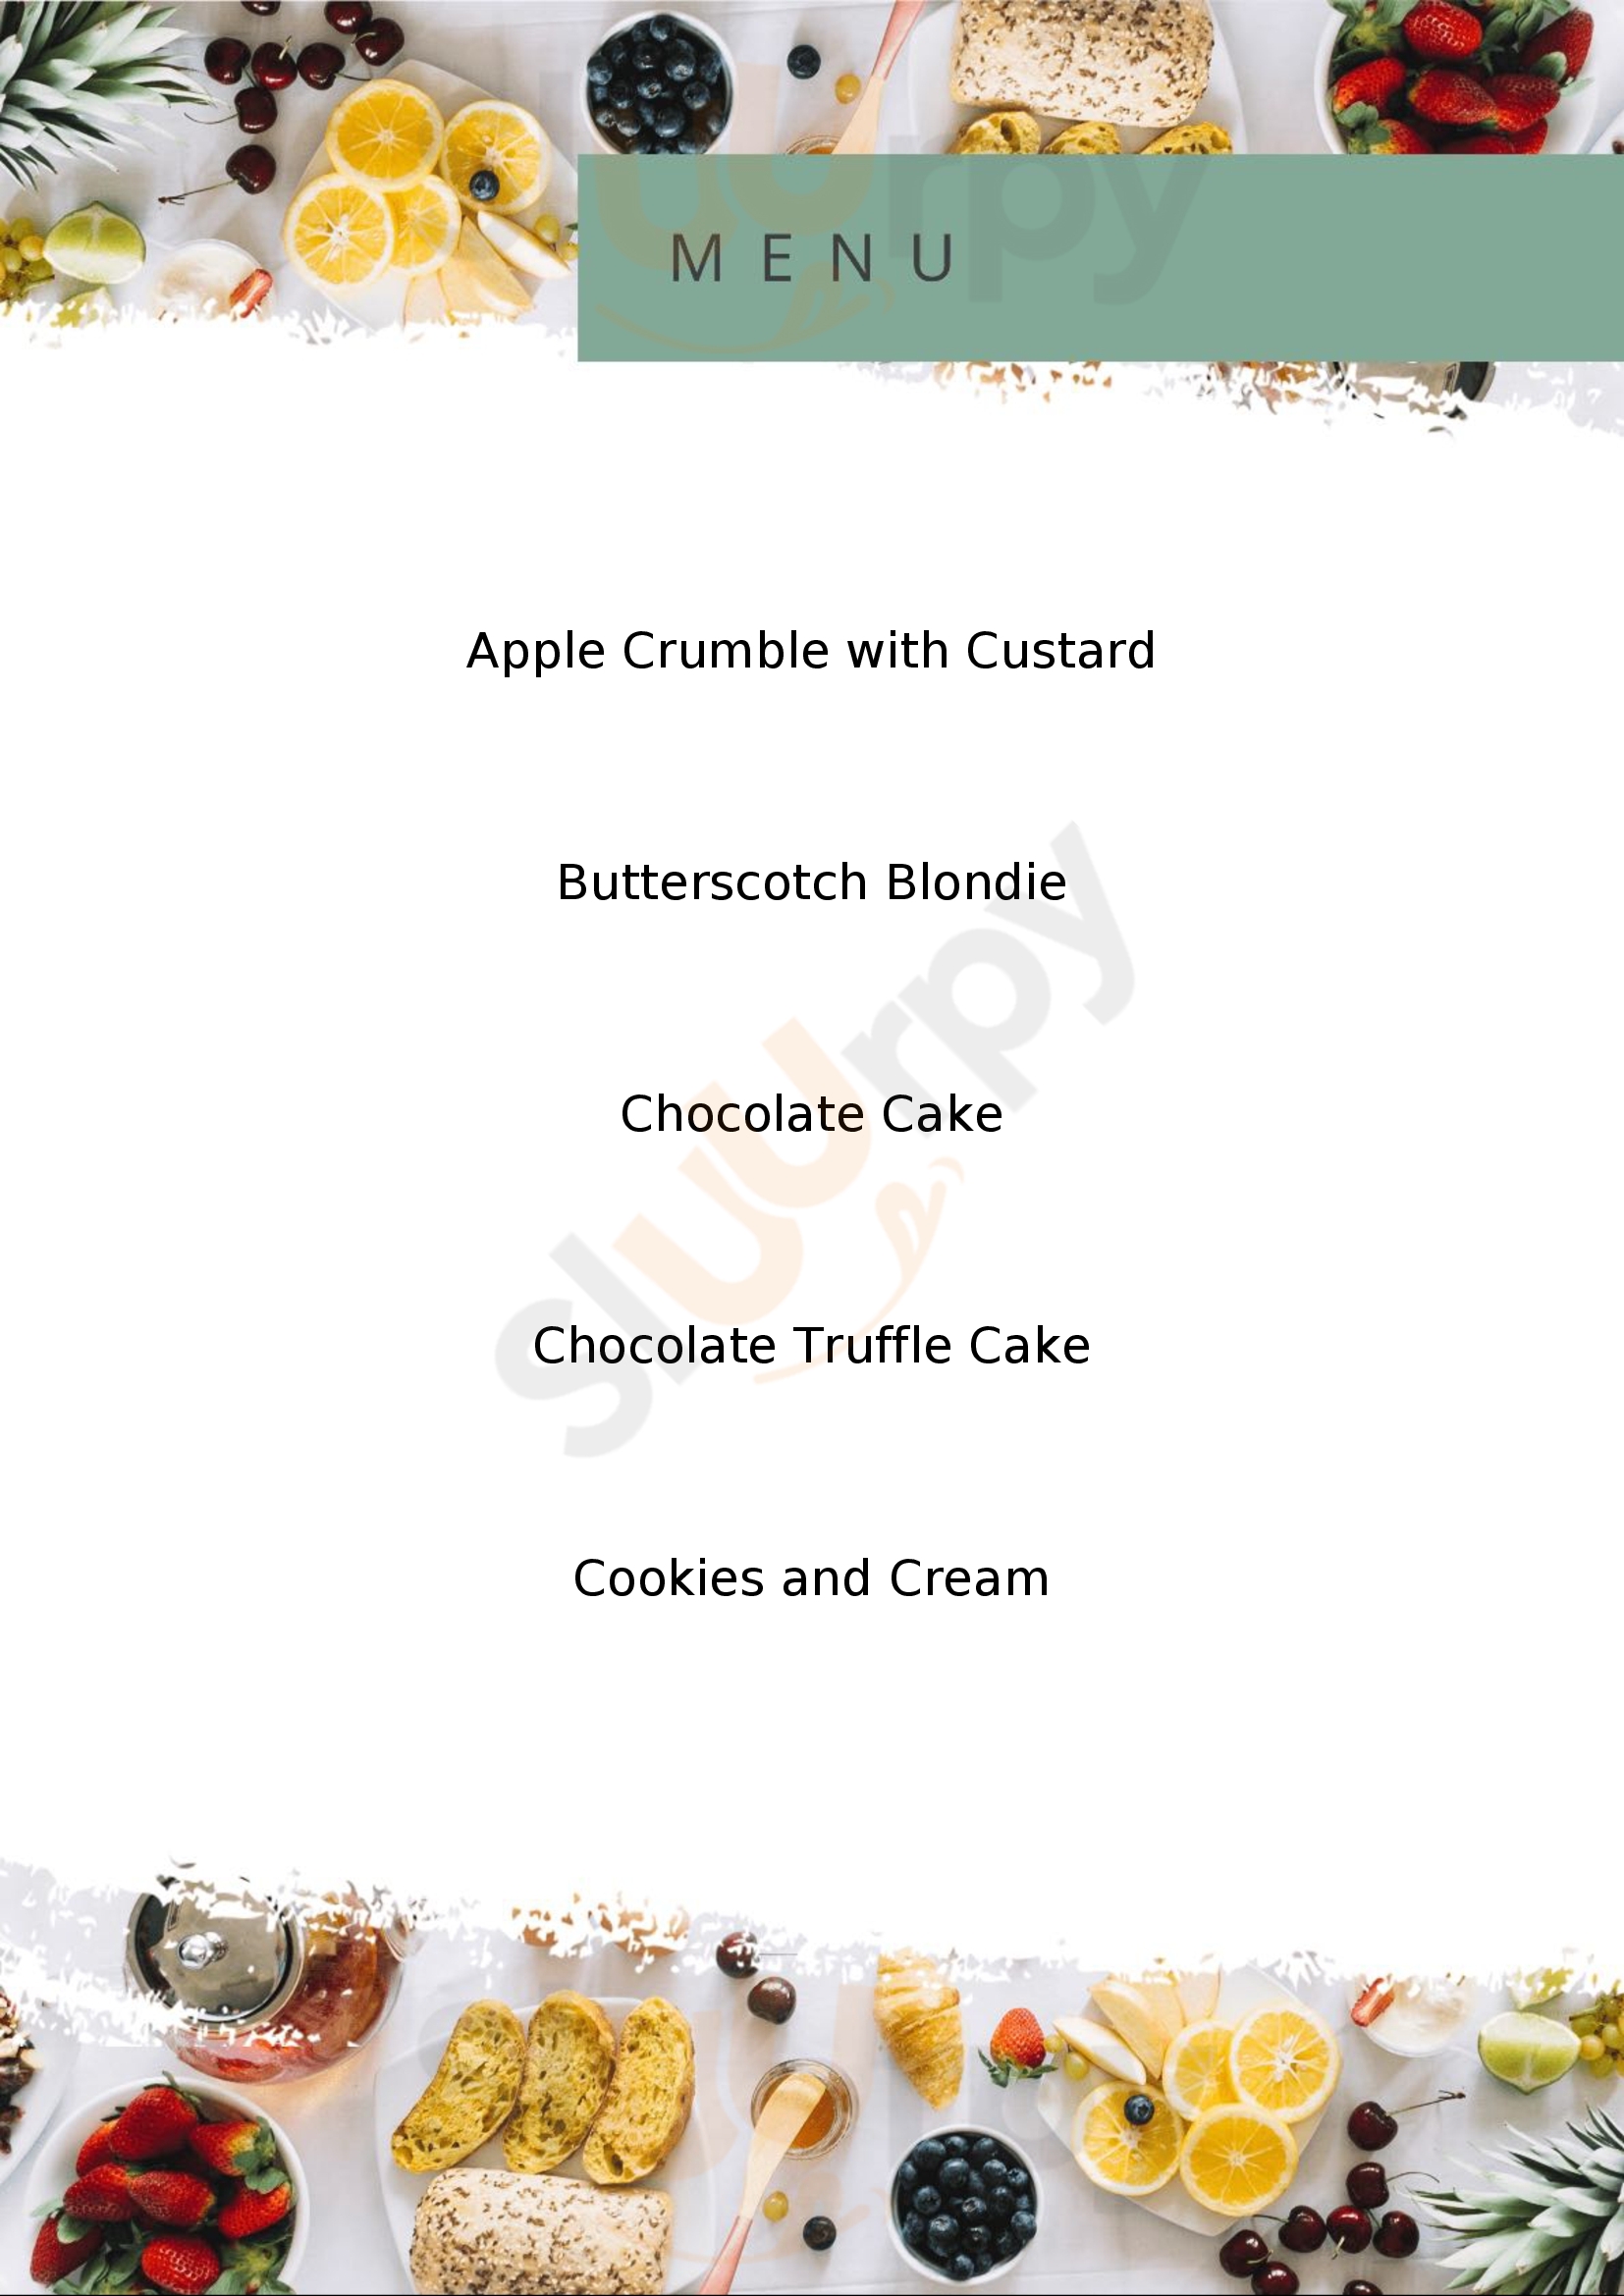 Stacey's Cakes And Desserts Auckland Central Menu - 1